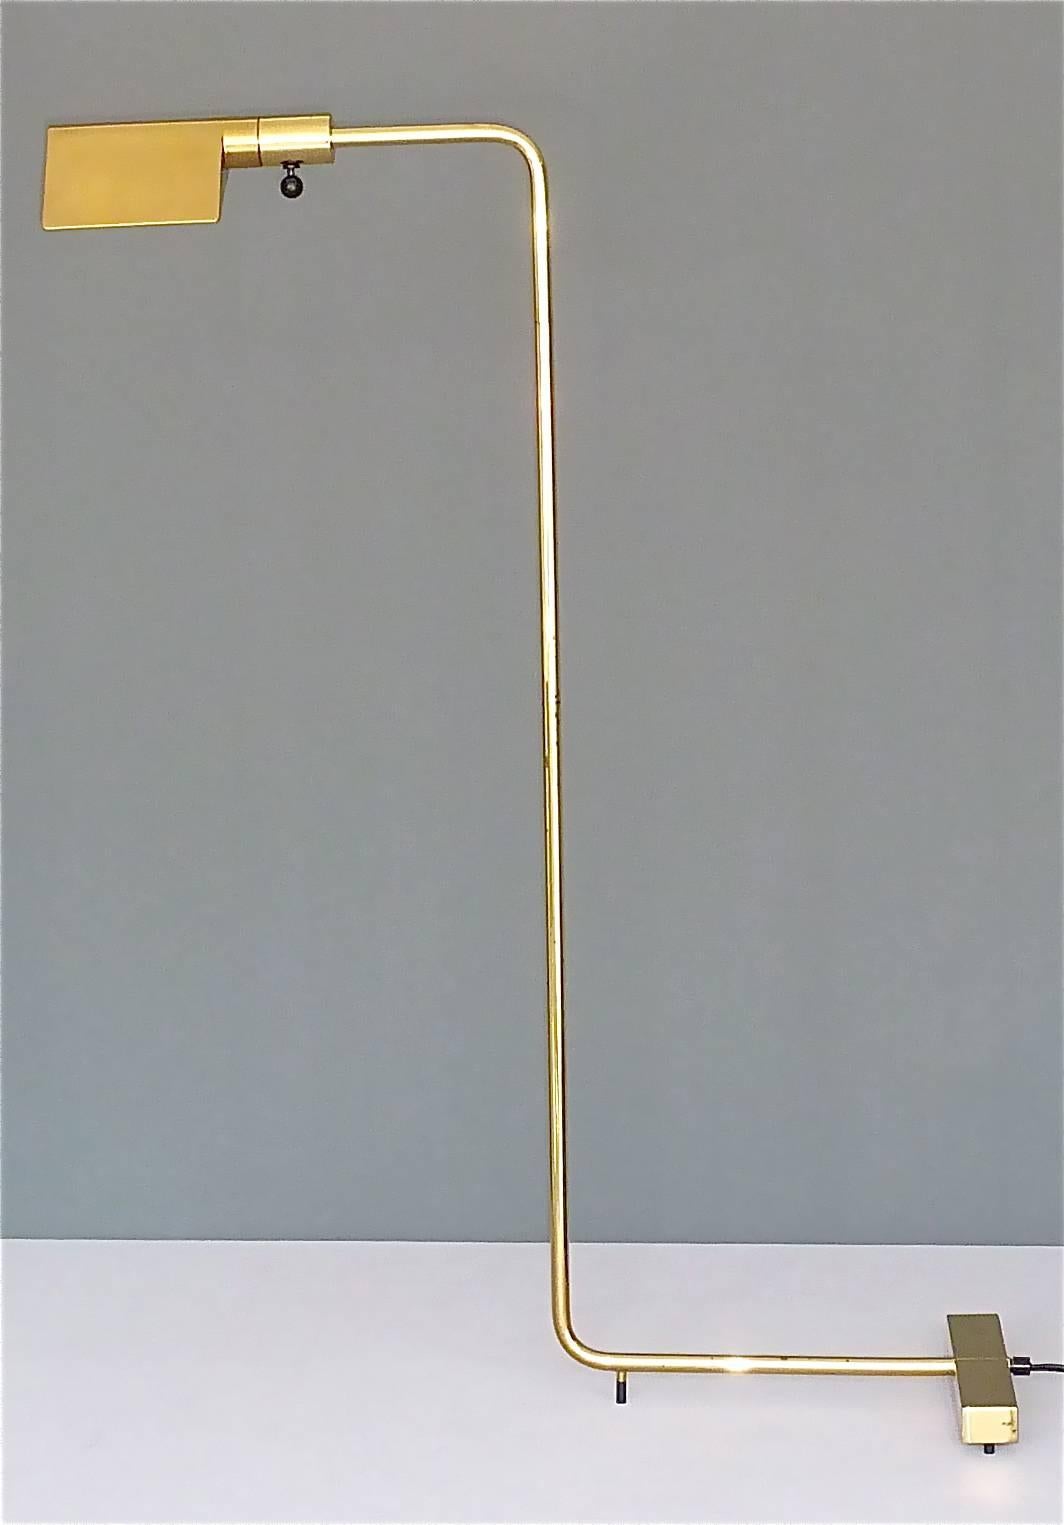 Polished Brass Floor Lamps No.7 by Cedric Hartman for Jack Lennor Larsen, 1960-1970, Pair